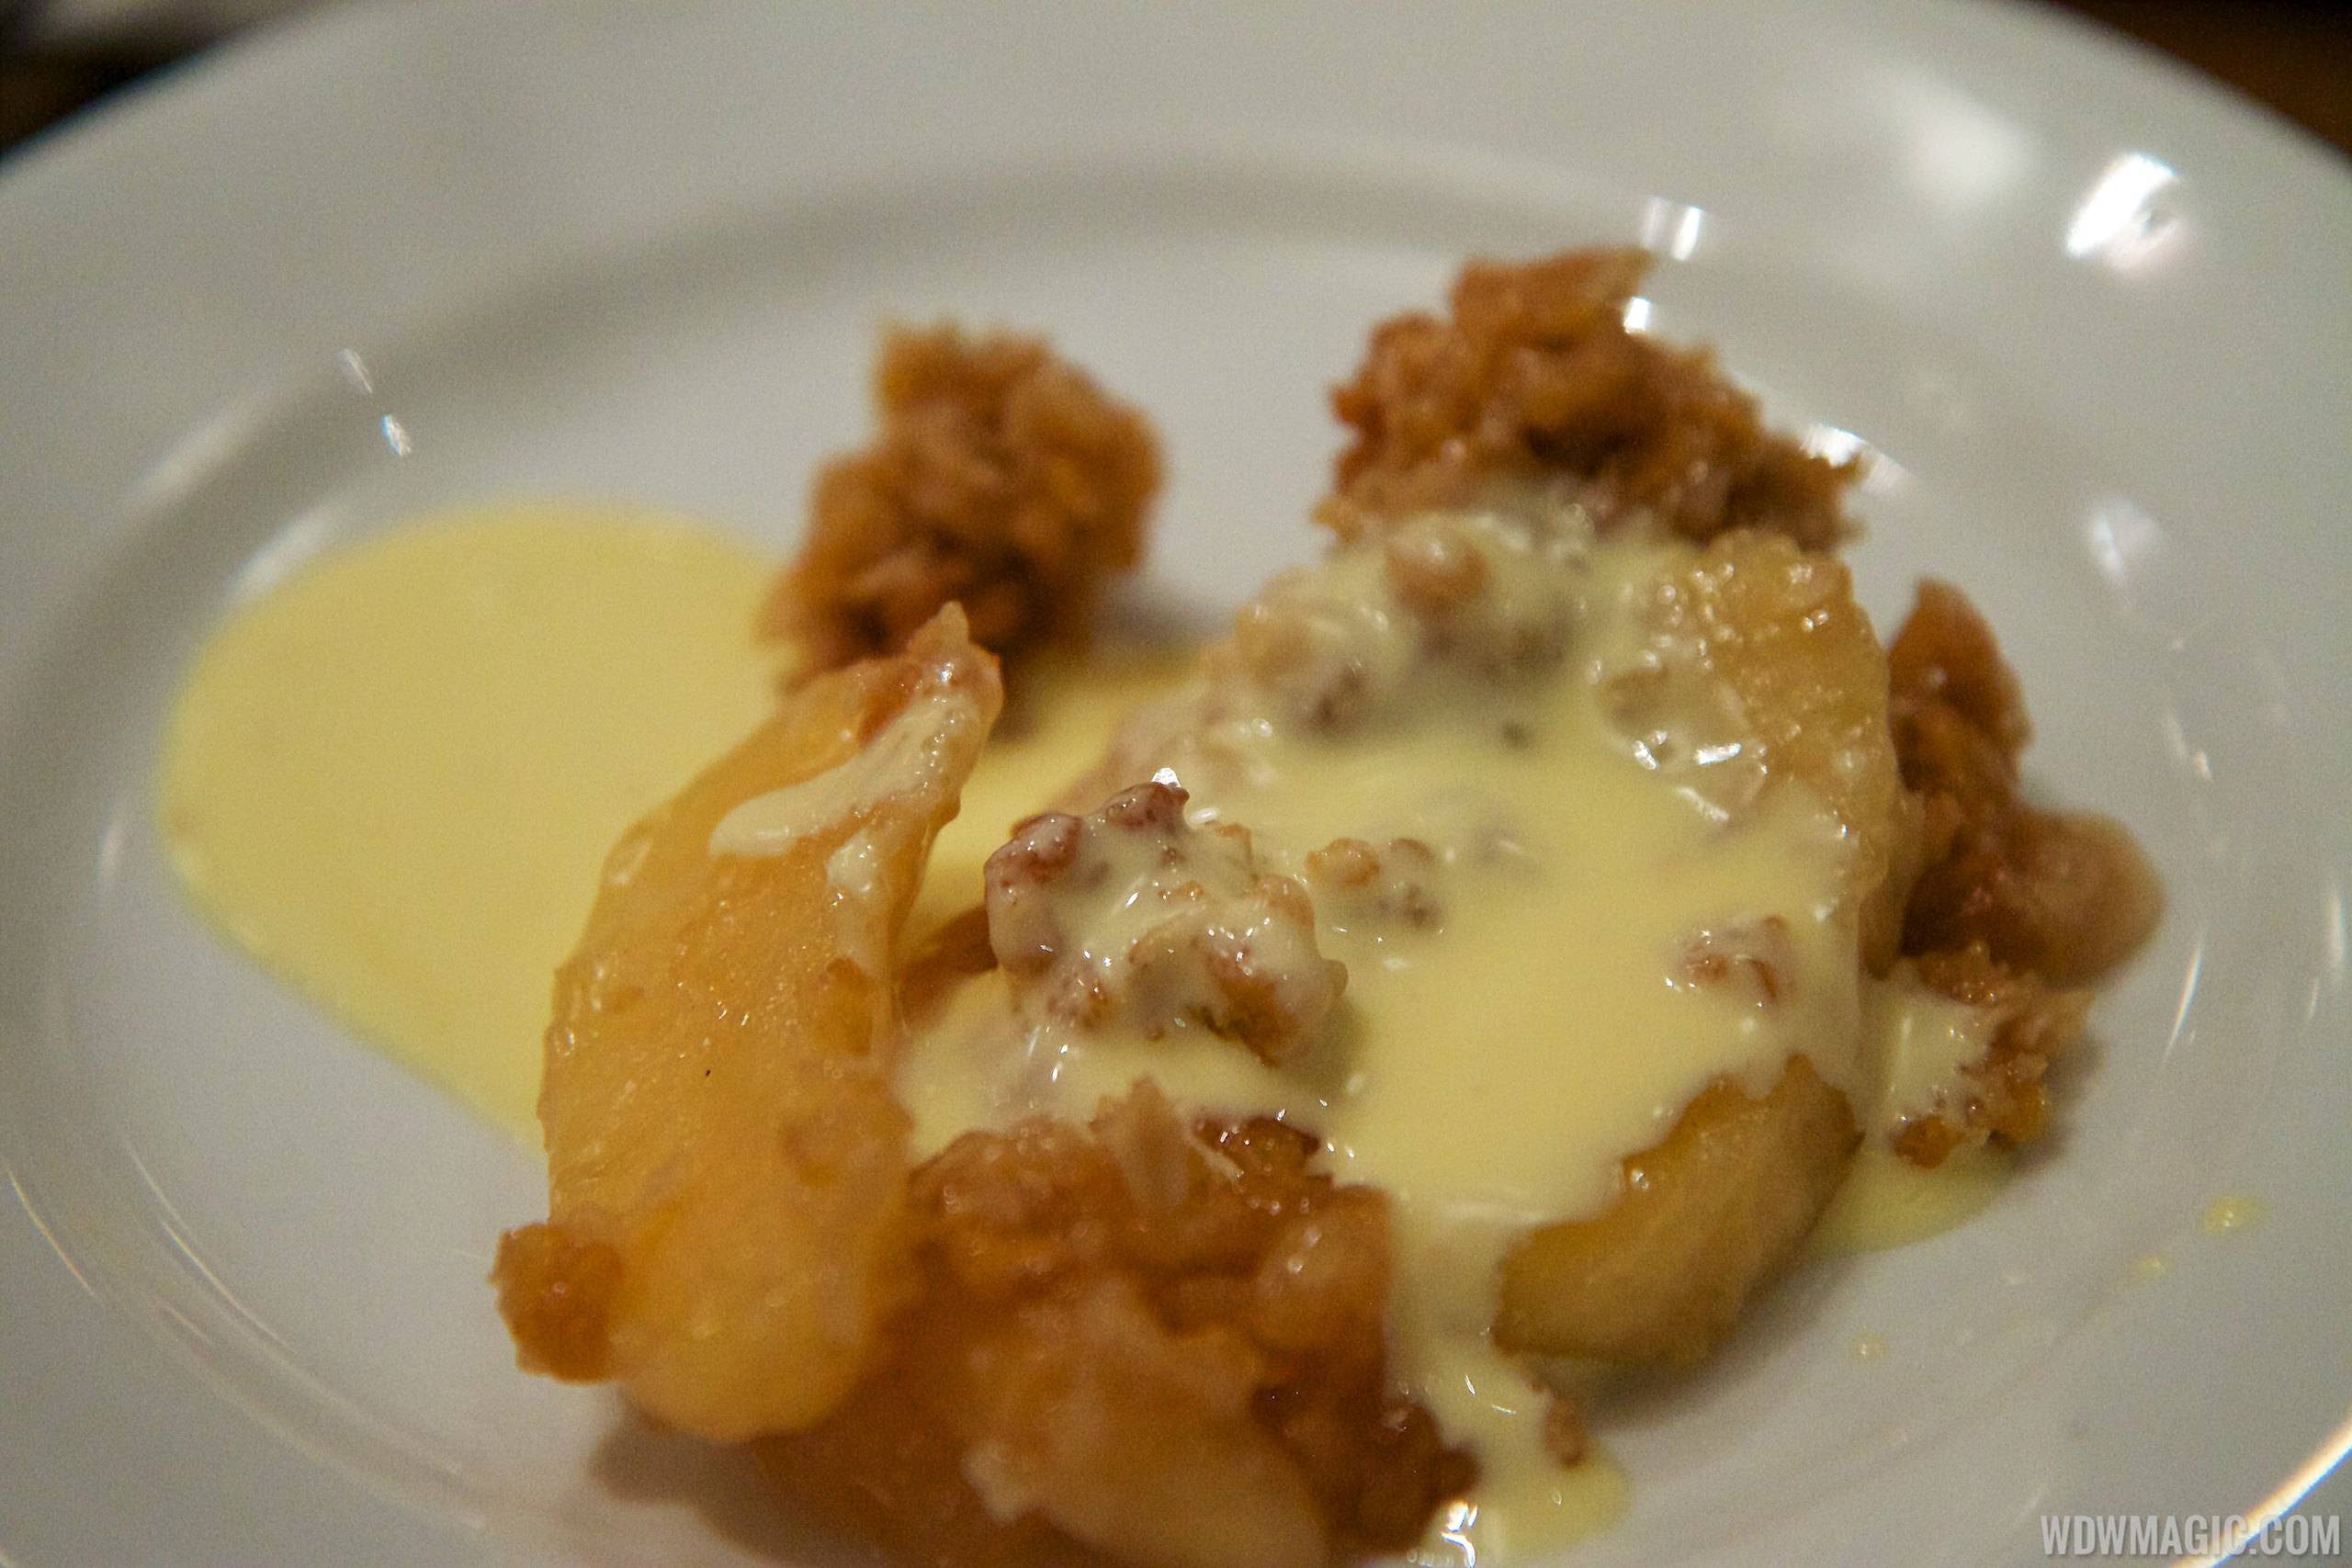 Boma Dinner buffet plate - Apple crumble and sauce